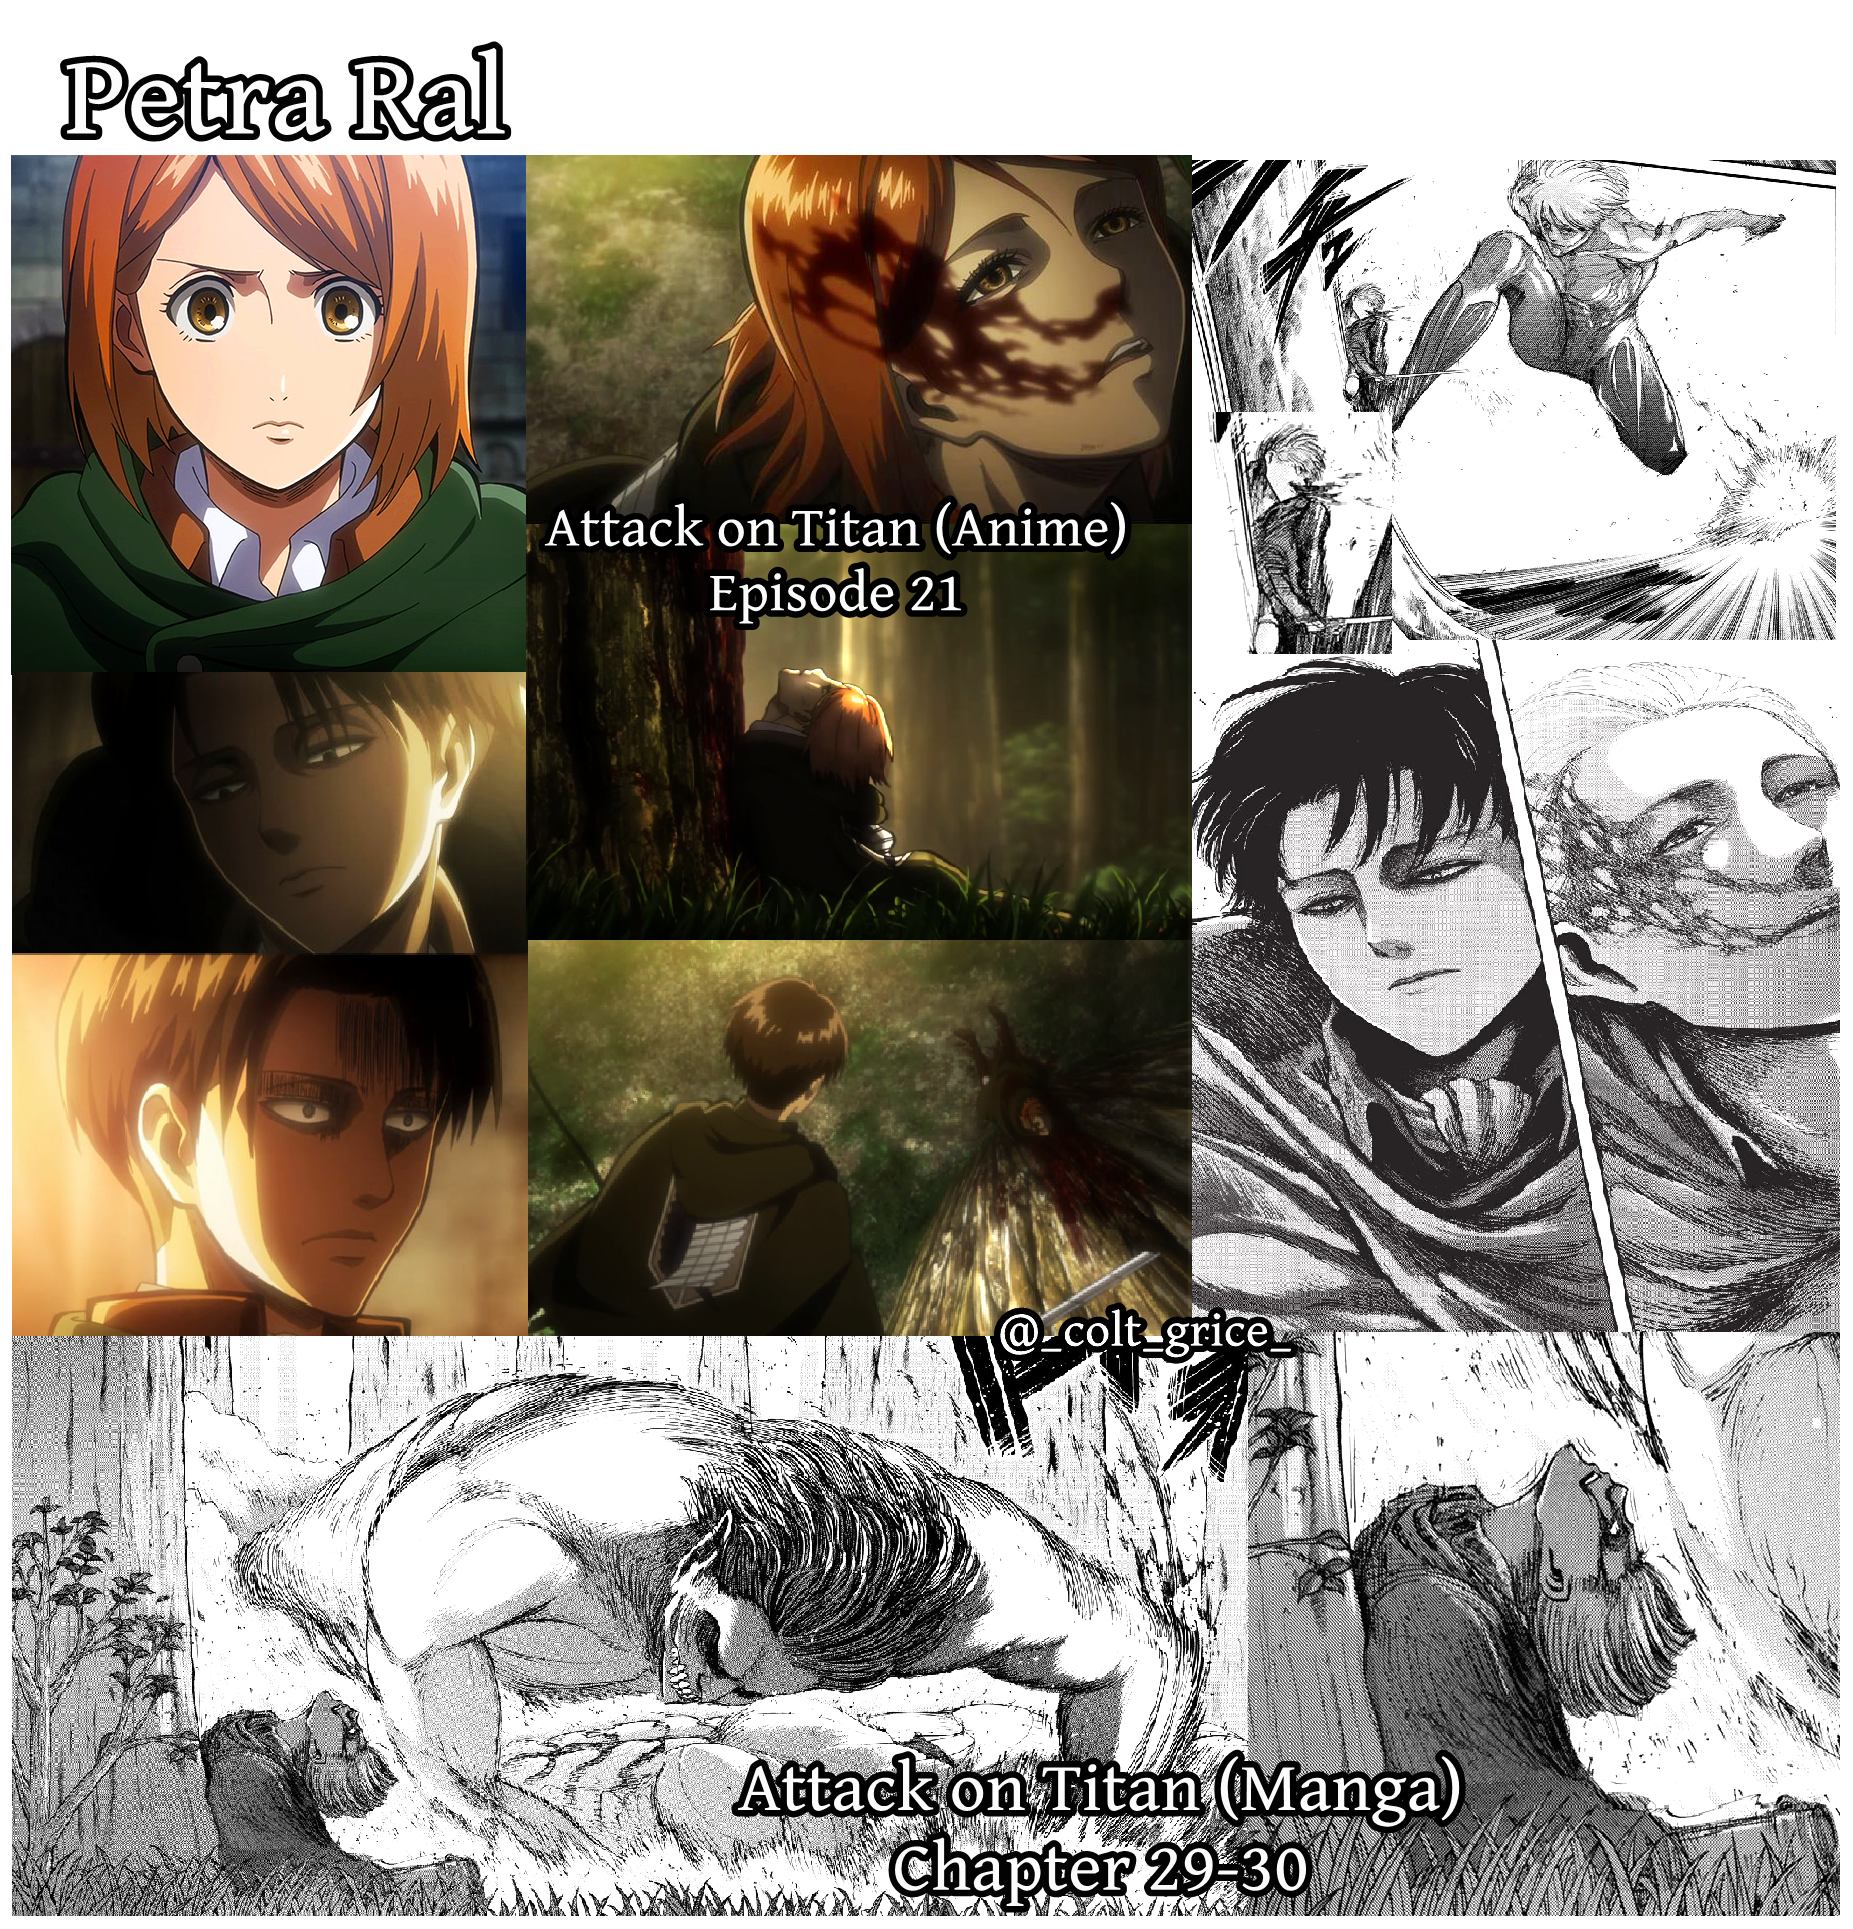 Attack on Titan - Levi react to Petra's death by edline02 on DeviantArt